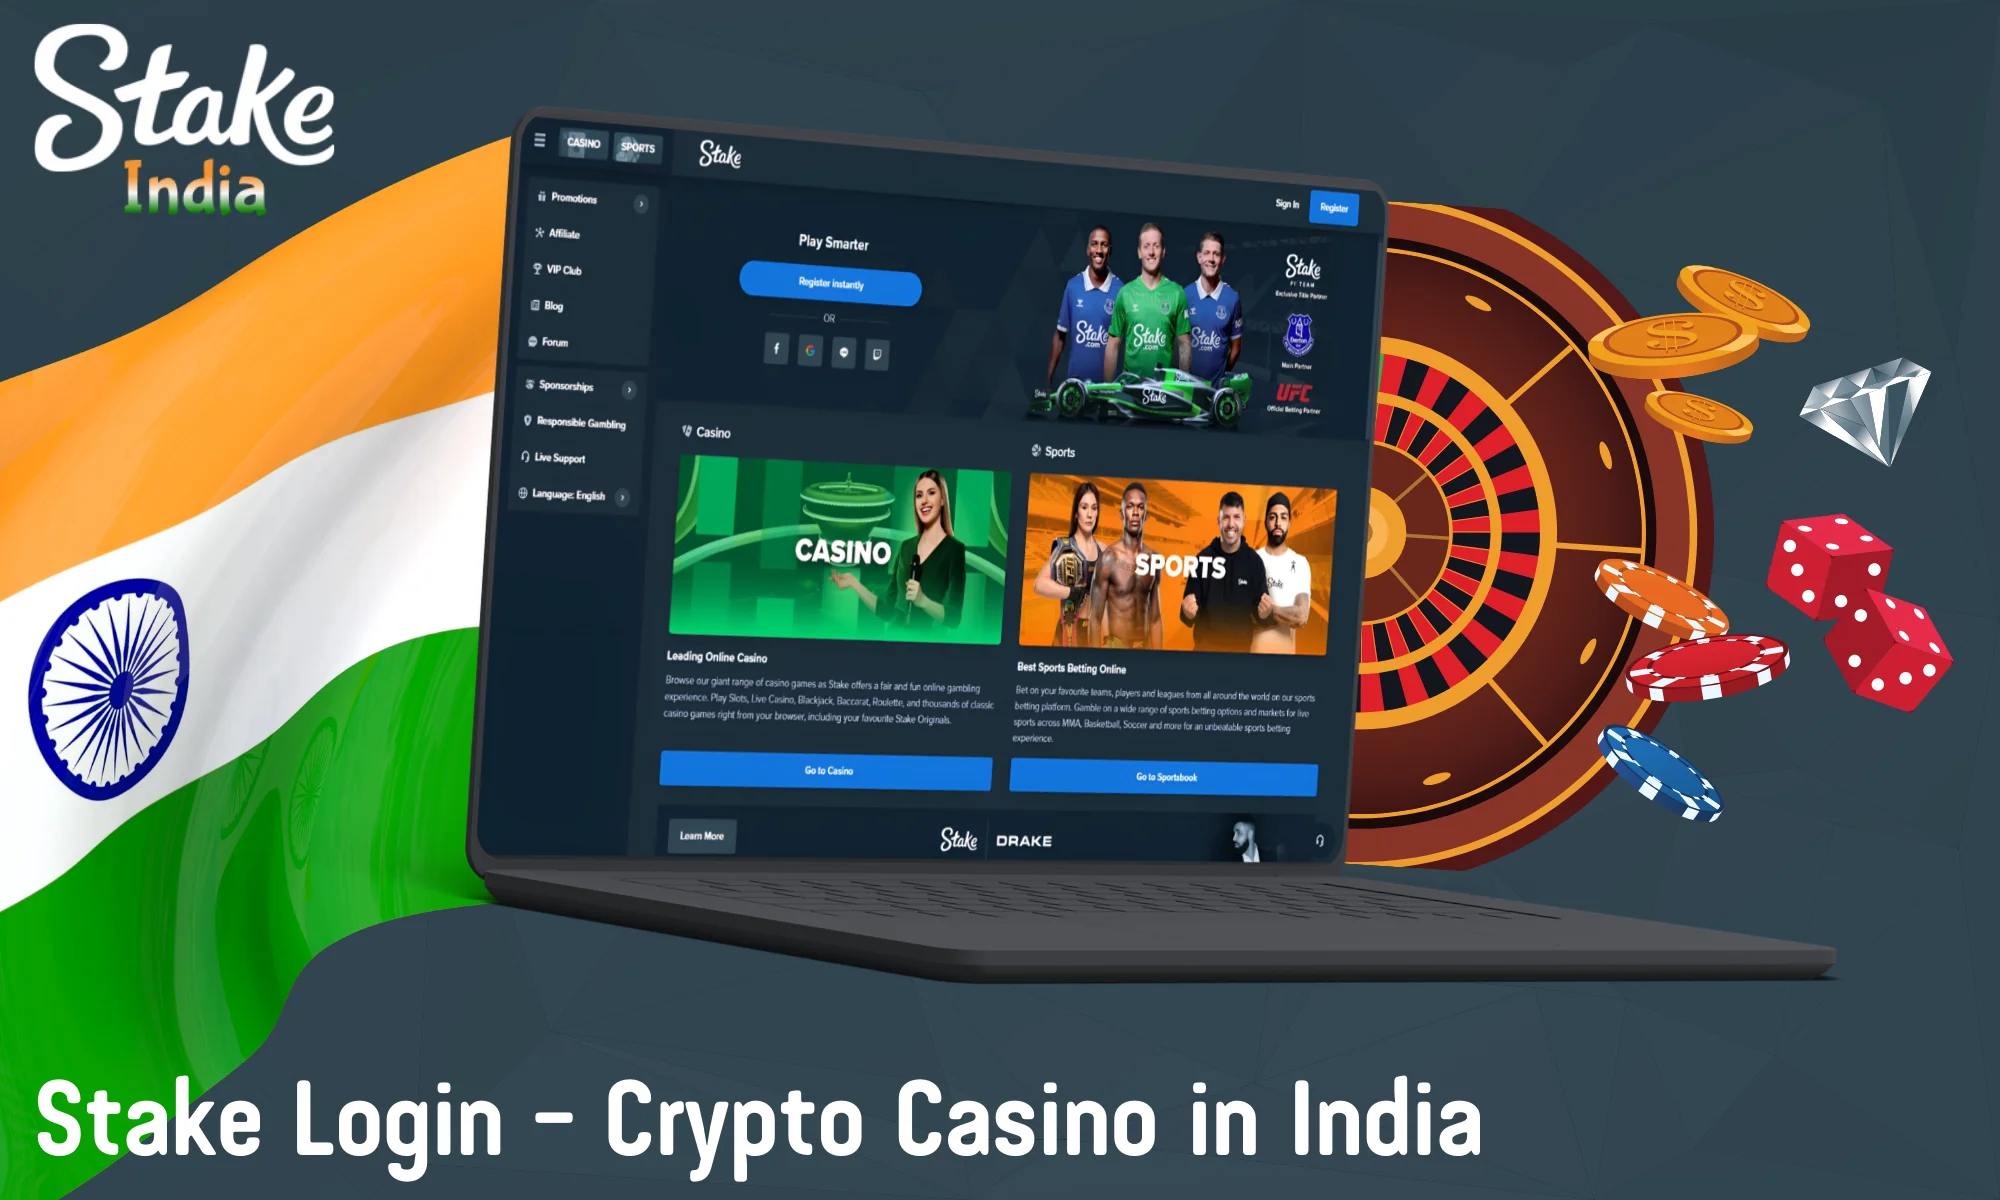 Stake Casino has many new and modern games that are available to Indian players